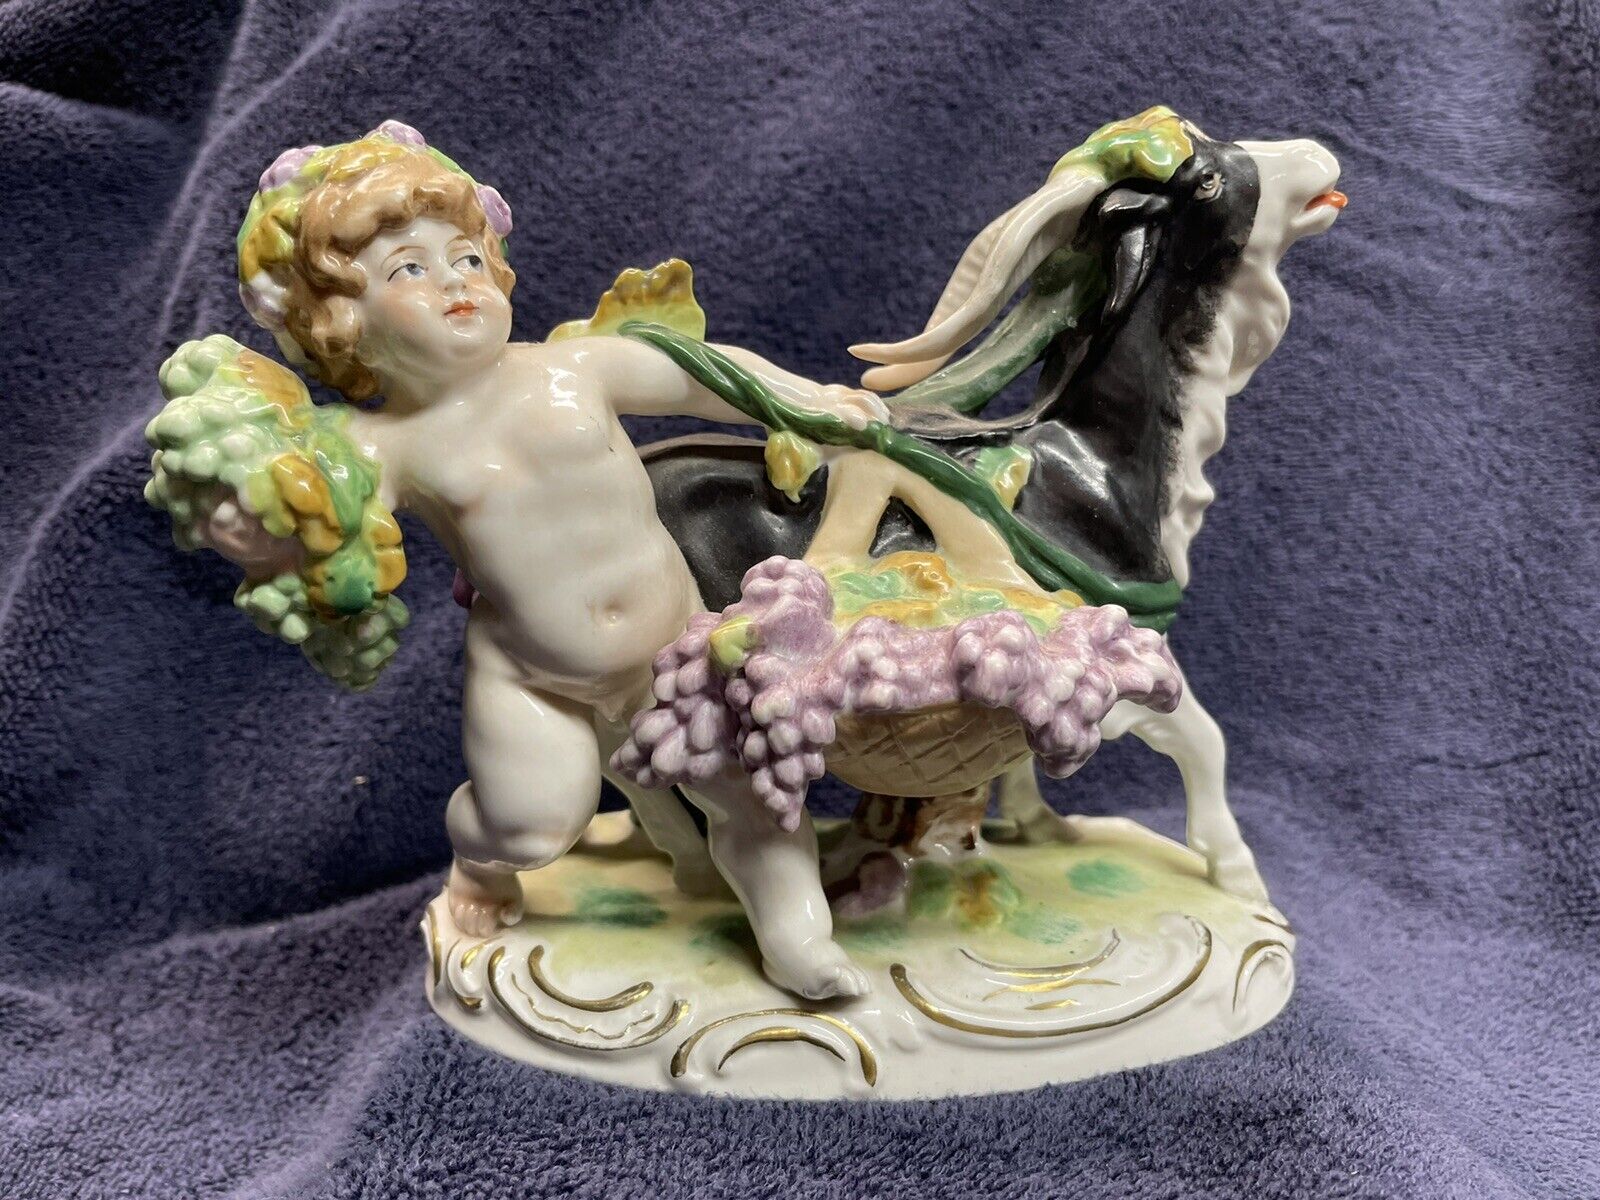 Kister scheibe alsbach figurine Goat And Child Bacchus Putto Made In Germany